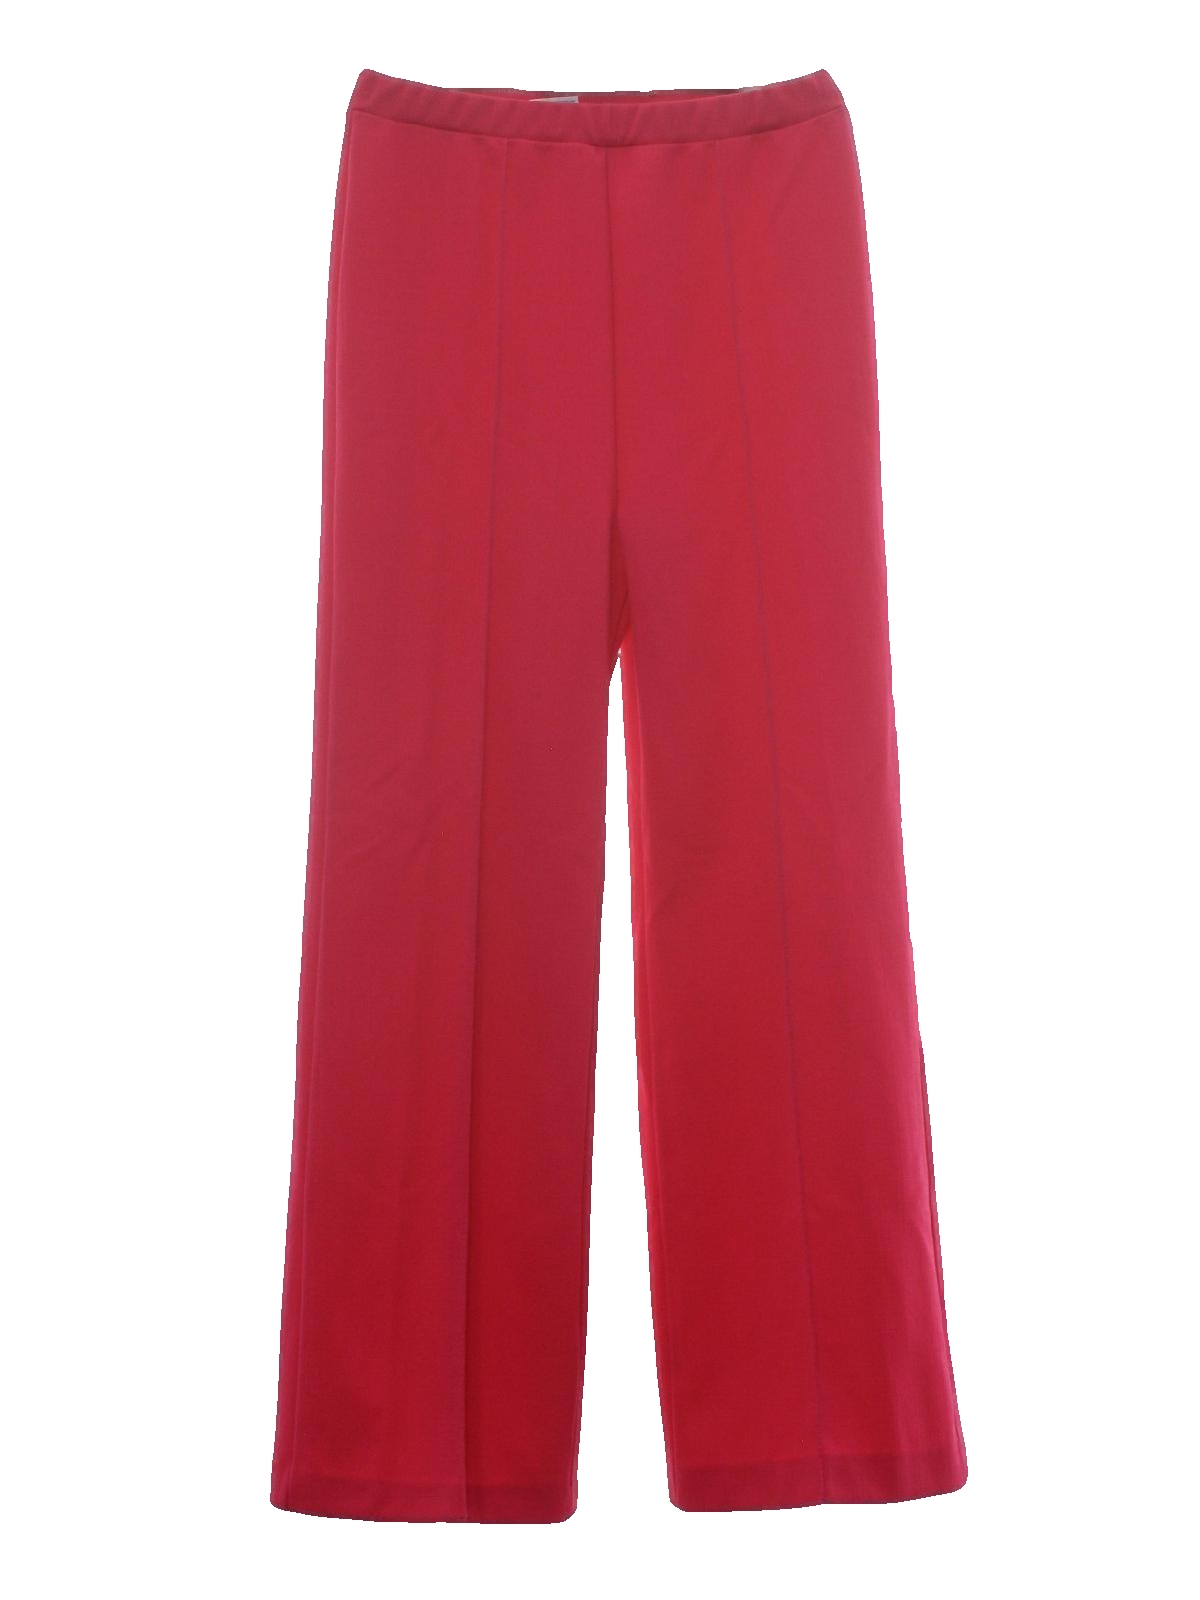 Retro Seventies Flared Pants / Flares: 70s -Pykettes- Womens hot pink ...